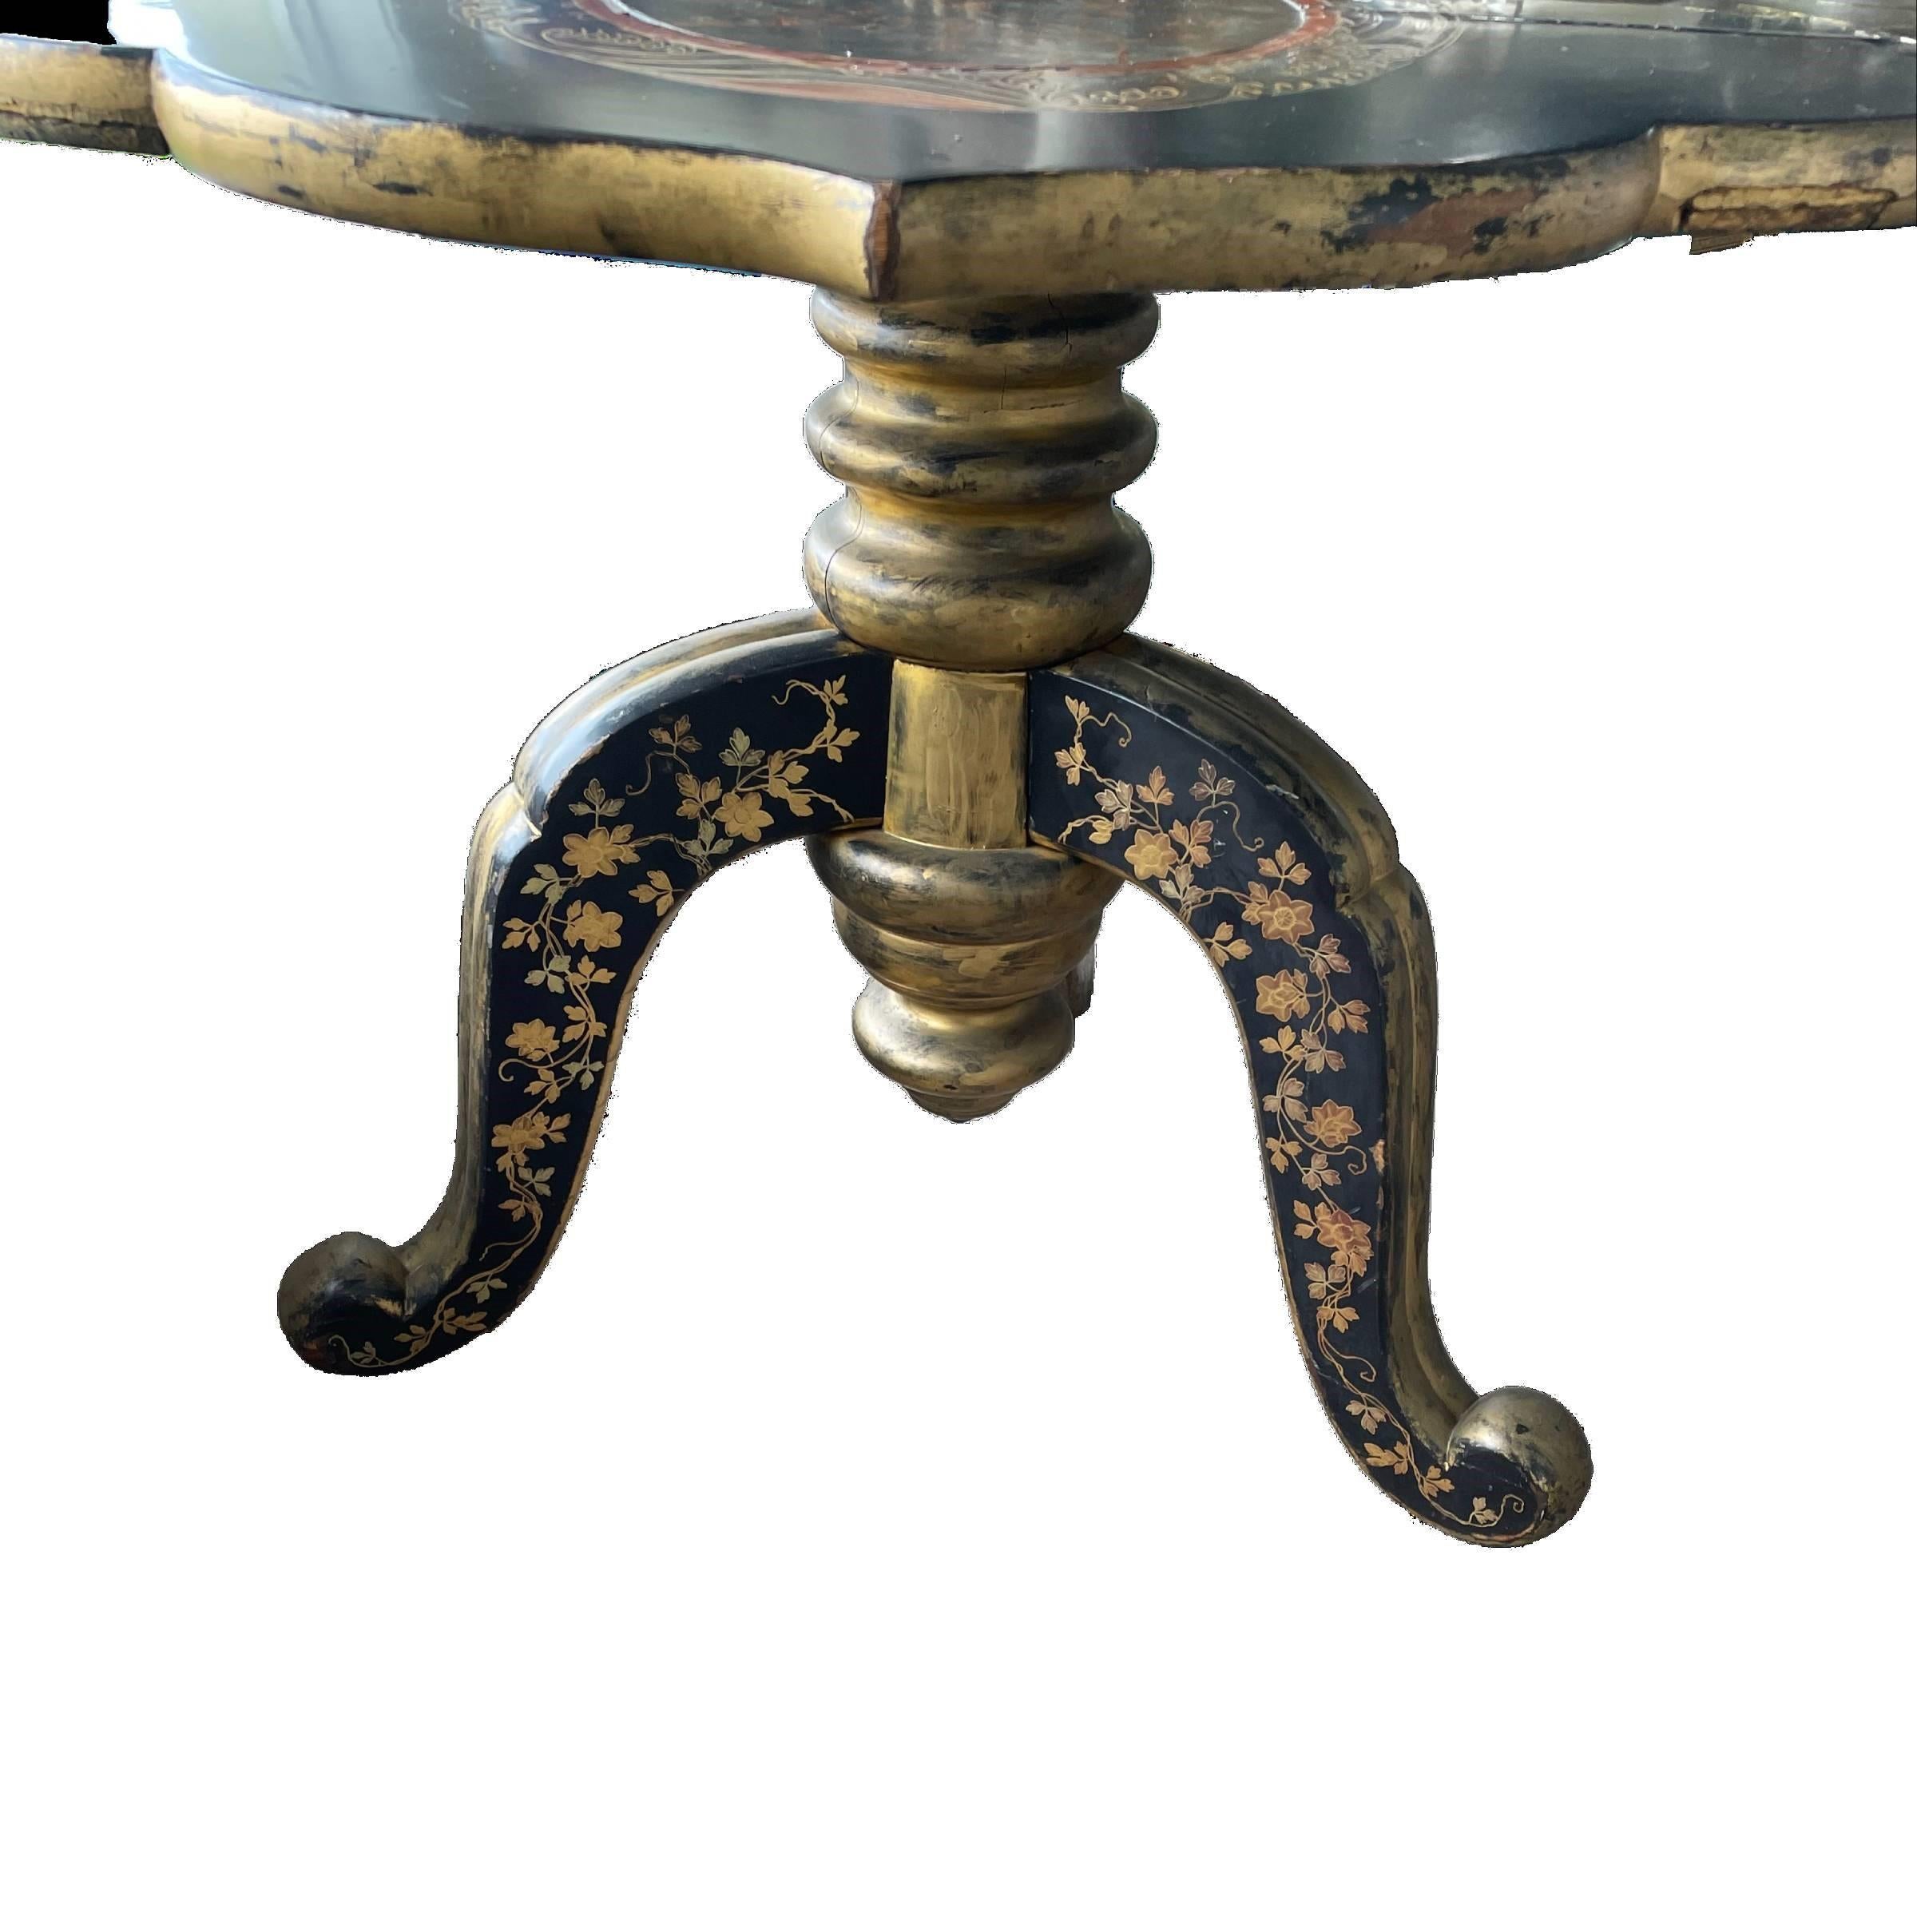 A Chinoiserie-themed antique wood table, finished in black lacquer has red and gold etching on the top and the legs. The solid, turned central stem is finished in gold. This elegant table folds down to a console piece.